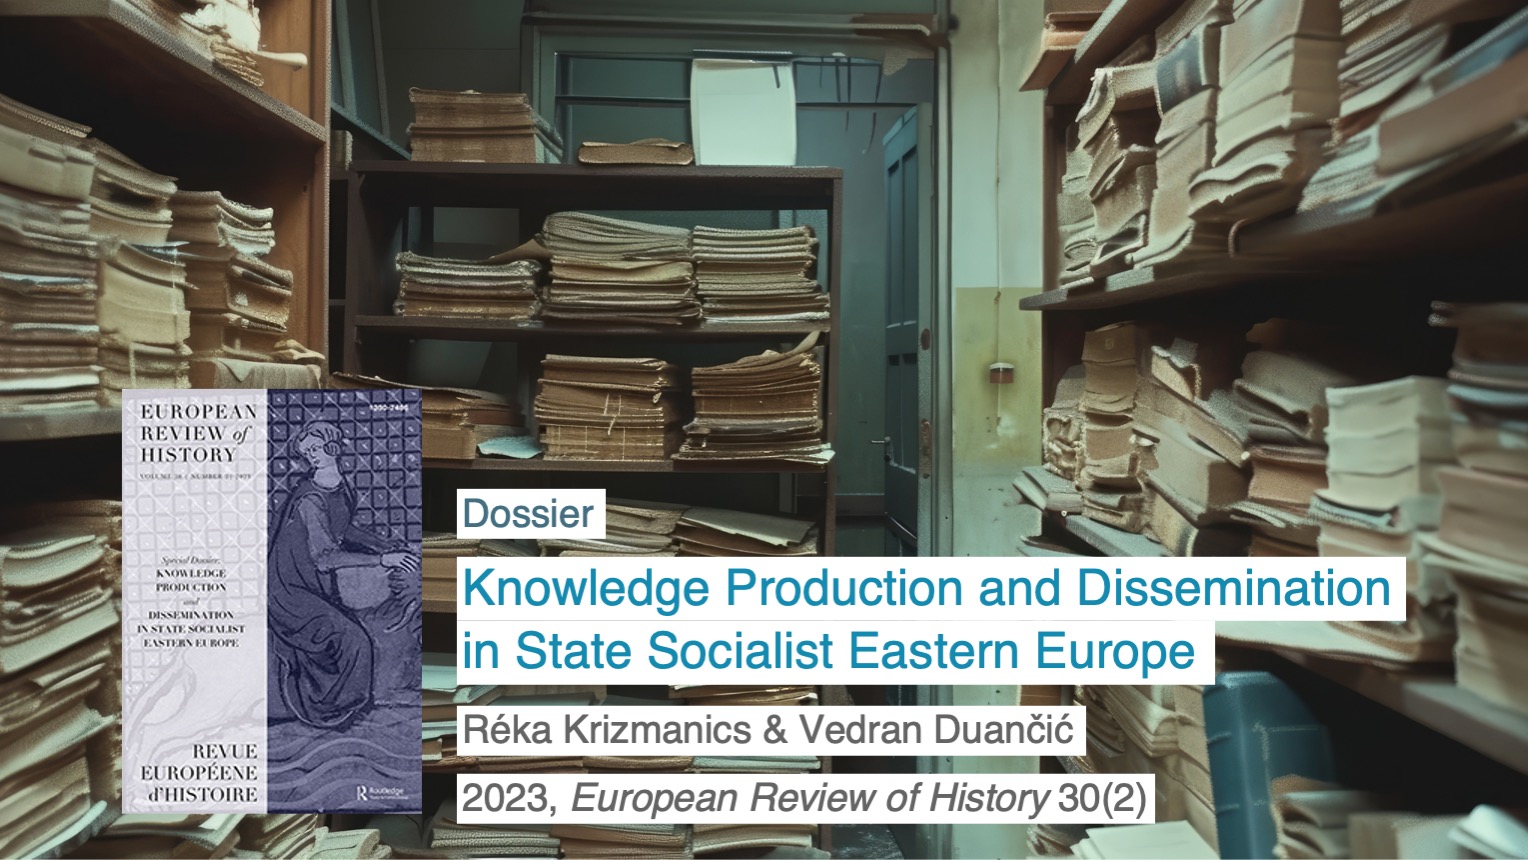 Réka Krizmanics, Vedran Duančić: Knowledge production and dissemination in state socialist Eastern Europe. 2023, European Review of History (30)2.